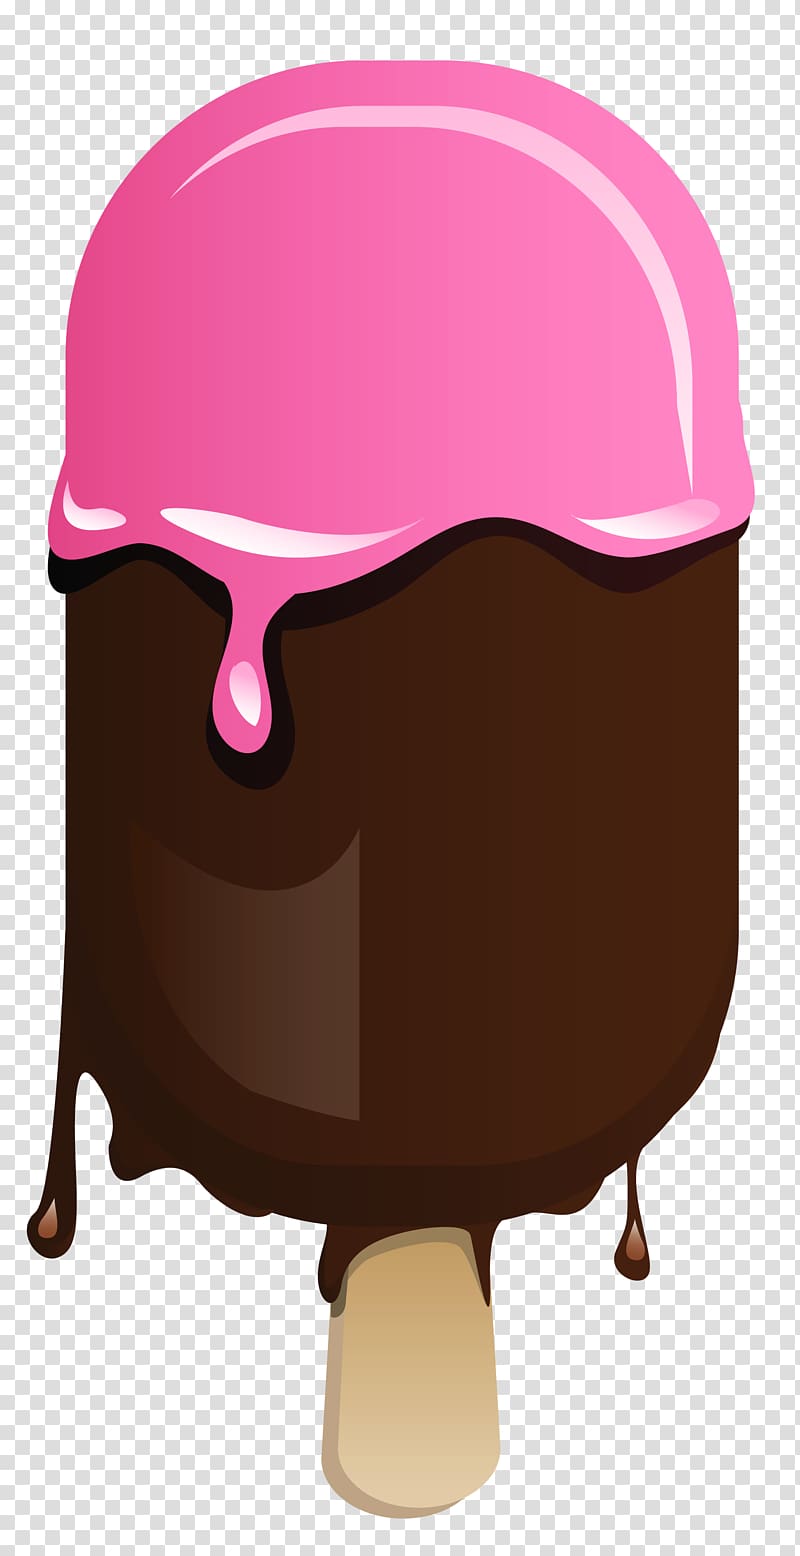 chocolate popsicle with strawberry dip illustration, Chocolate ice cream Ice cream cone , Ice Cream Stick transparent background PNG clipart